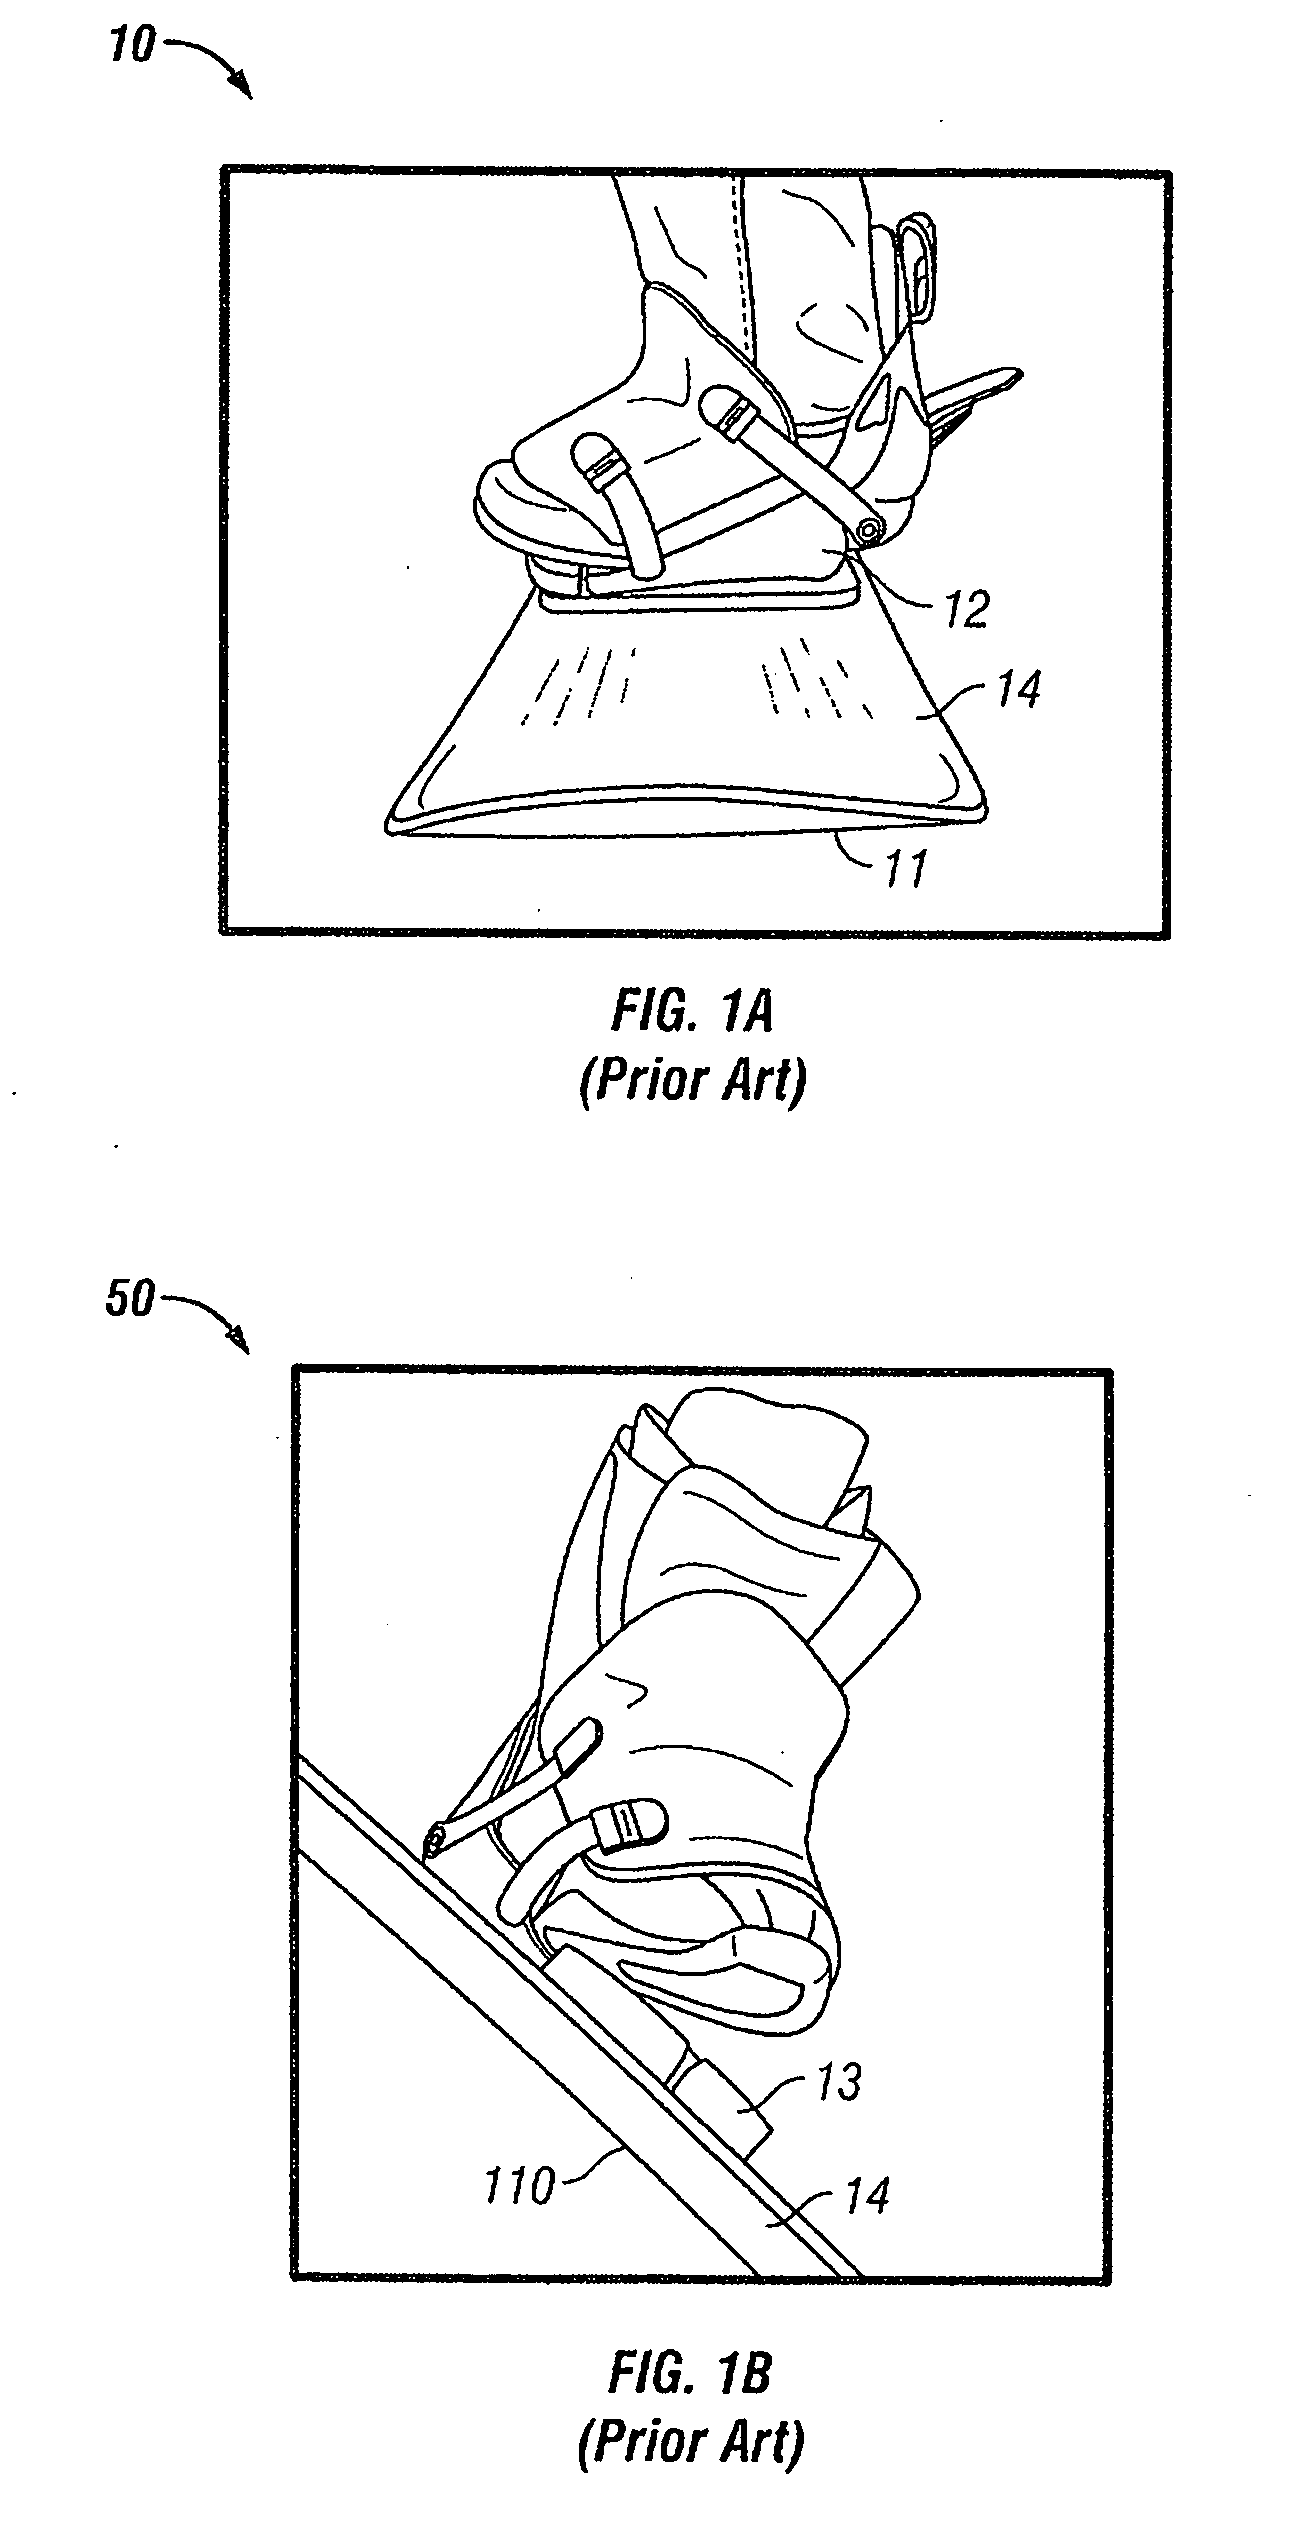 Hinged rotatable binding system for snowboards